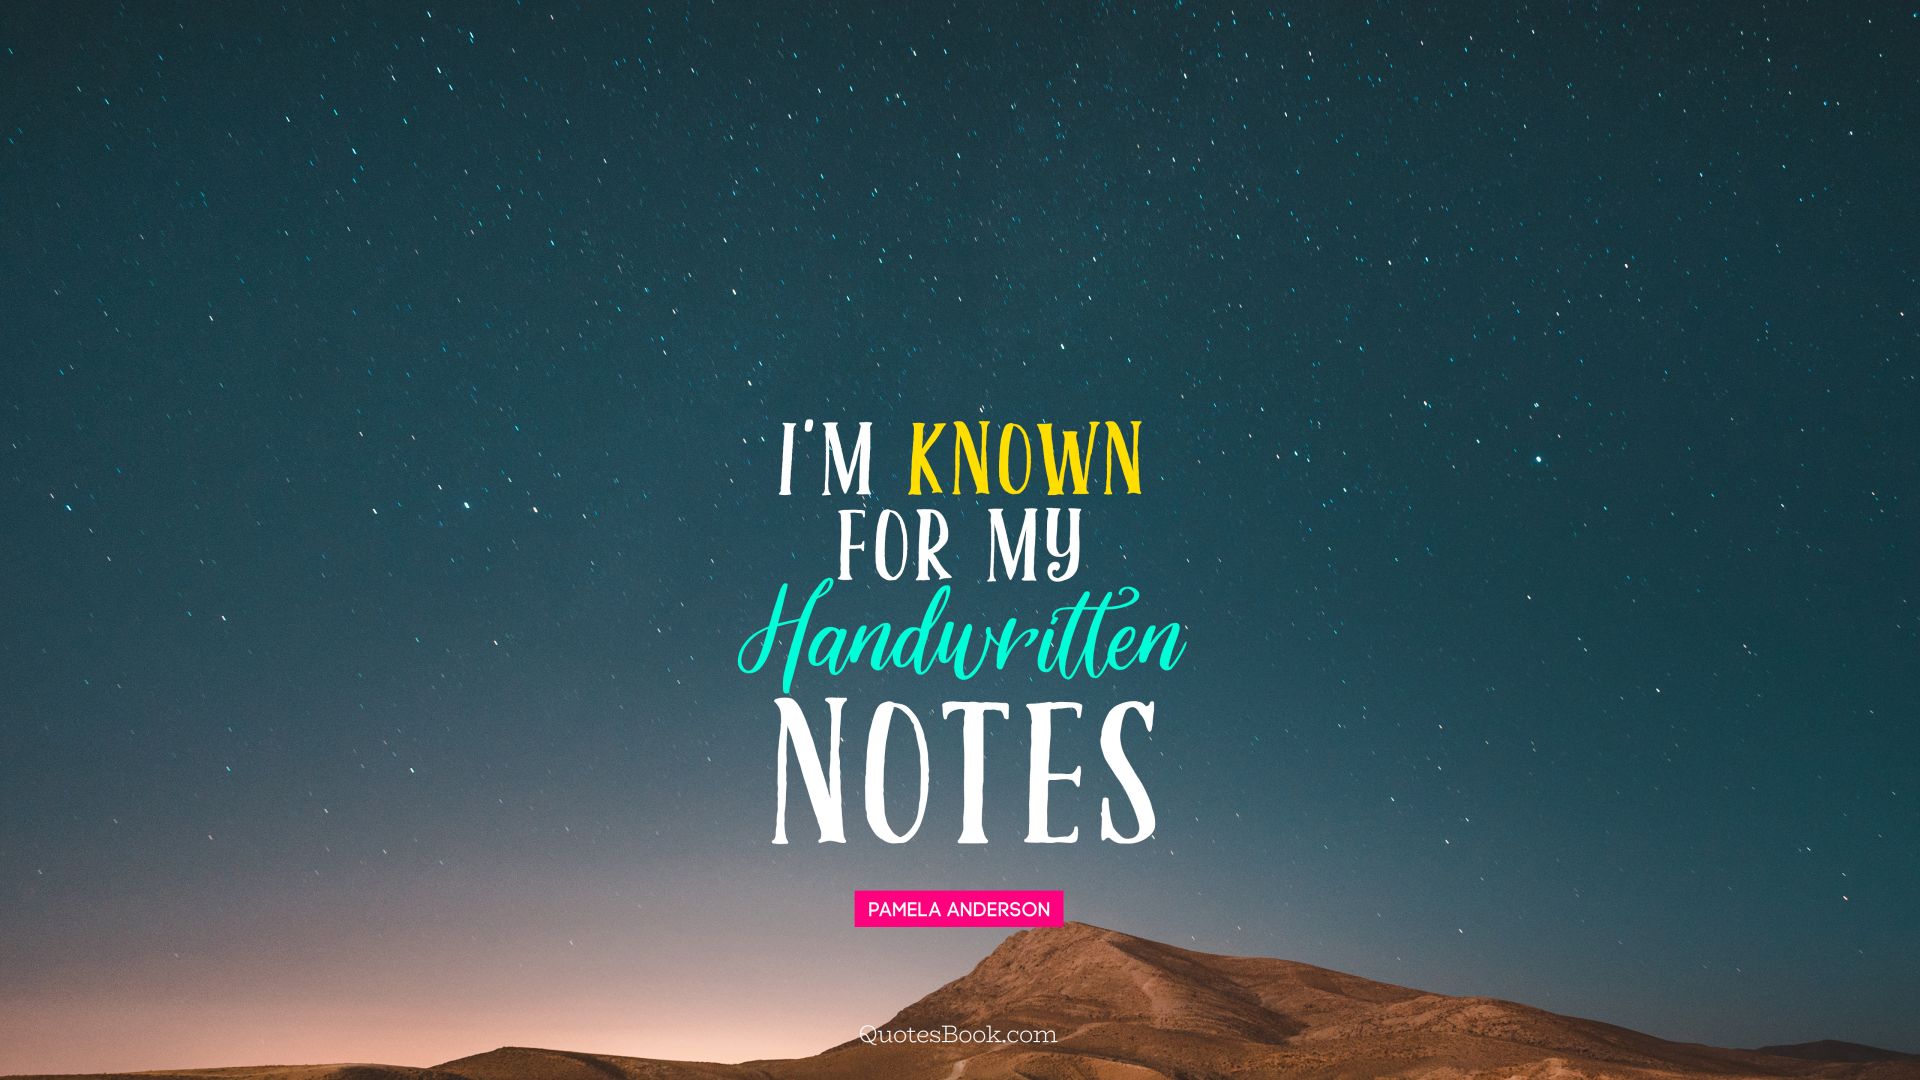 I'm known for my handwritten notes. - Quote by Pamela Anderson